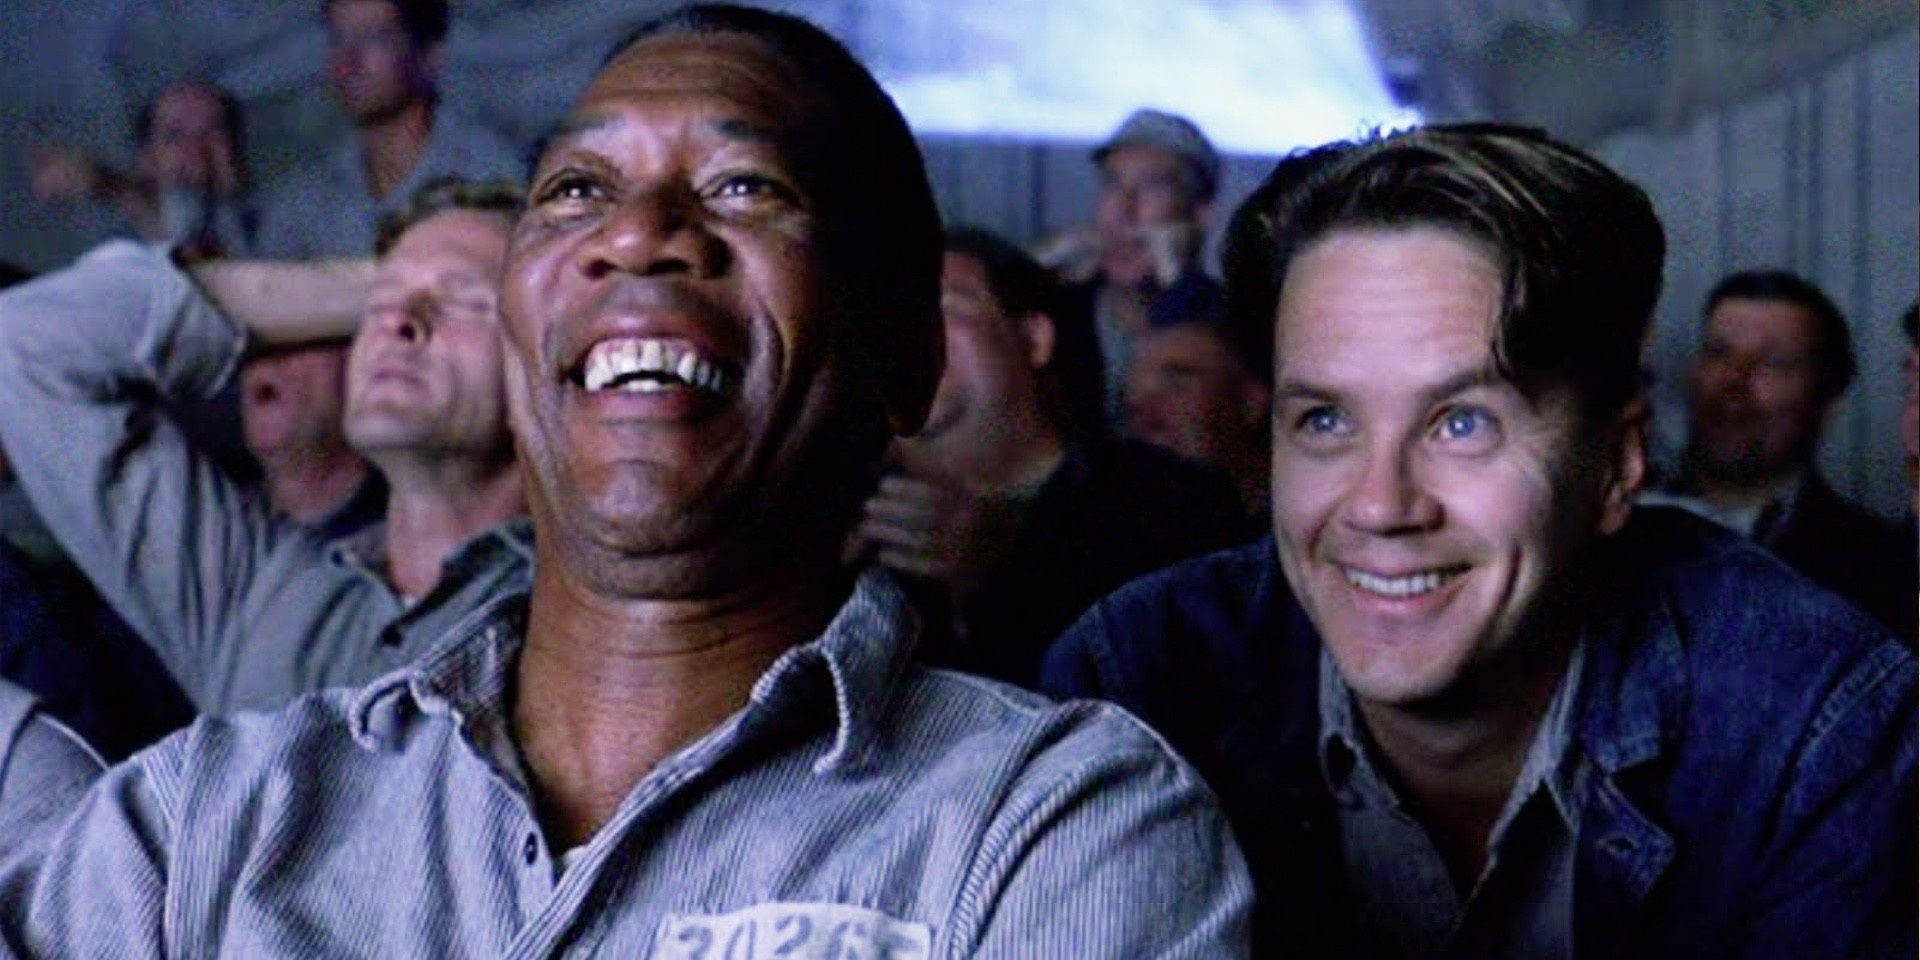 Stephen King Cant Convince A Shawshank Redemption Fan He Wrote The Story